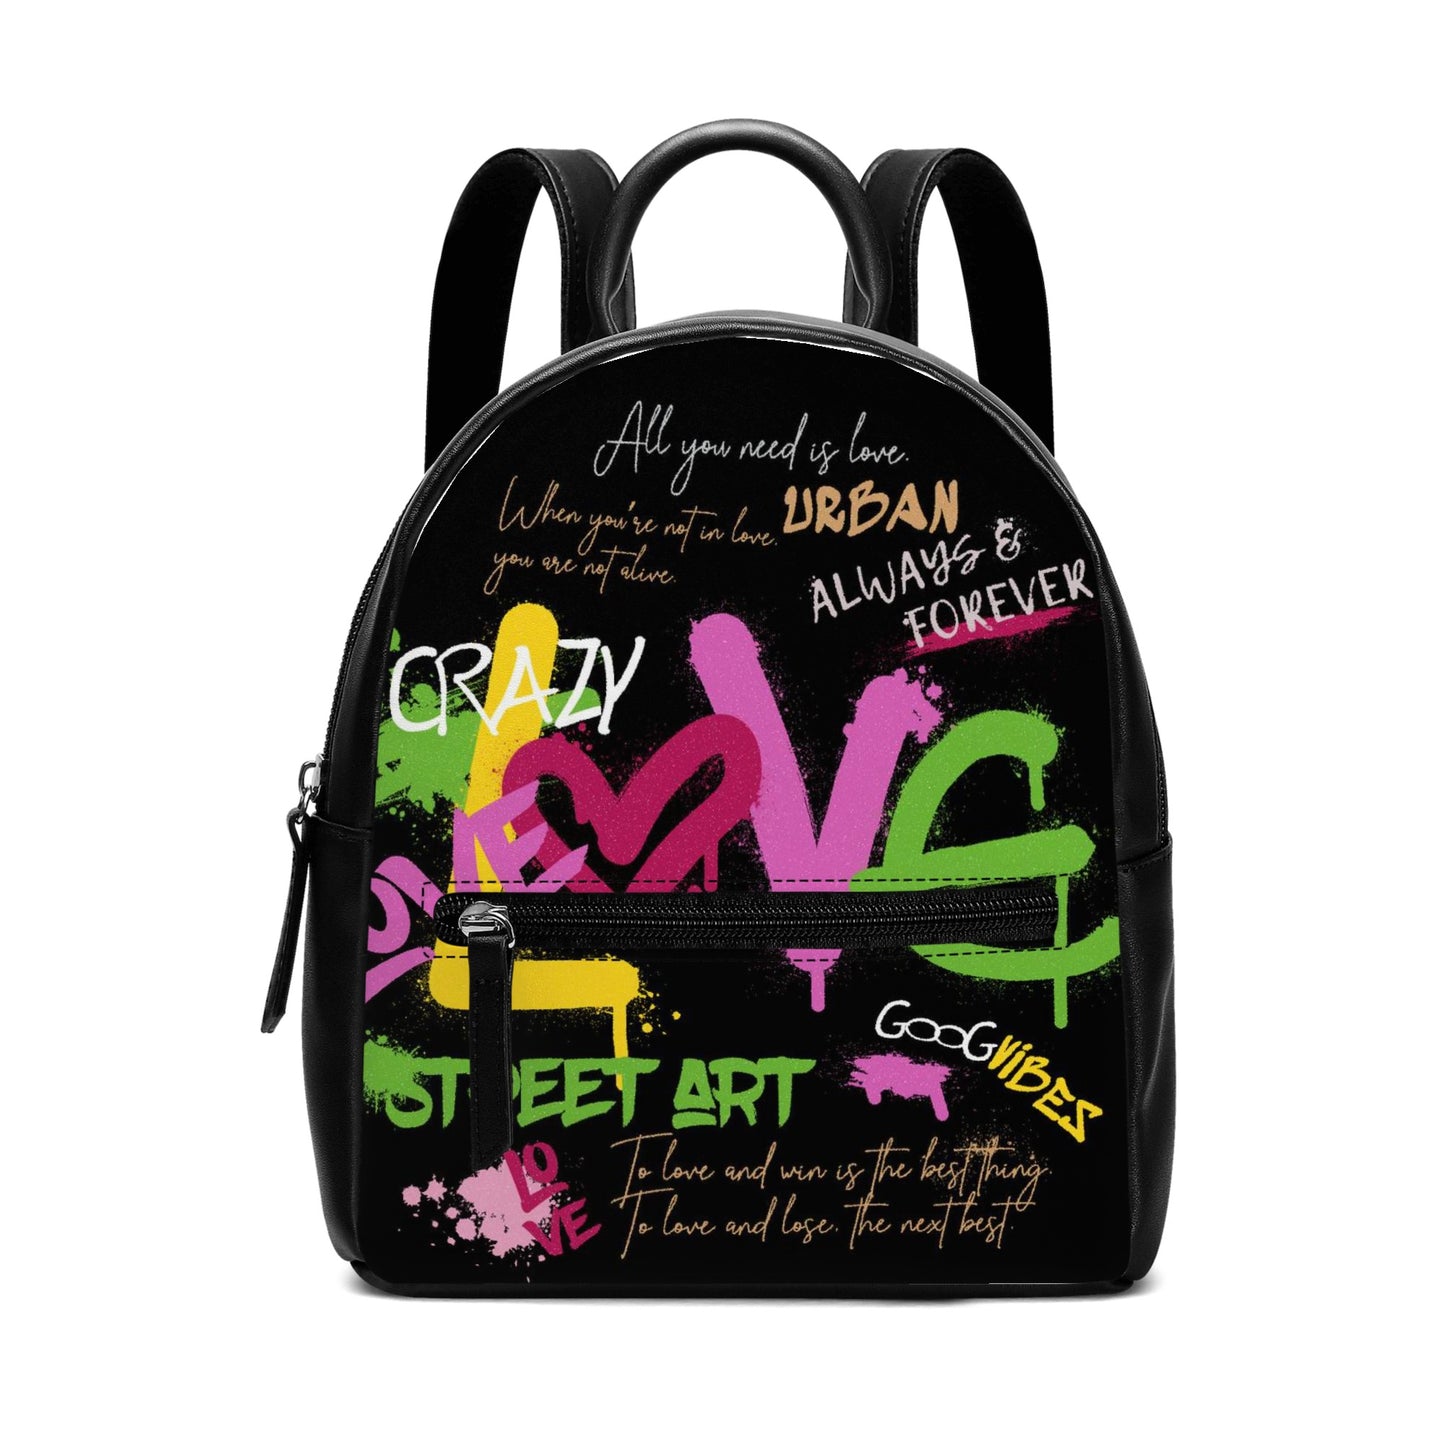 Get out there and show your love for street art with this rad backpack! It's perfect for toting around art supplies, and its awesome street art design will have heads turning. Make a statement and carry your stuff in style!